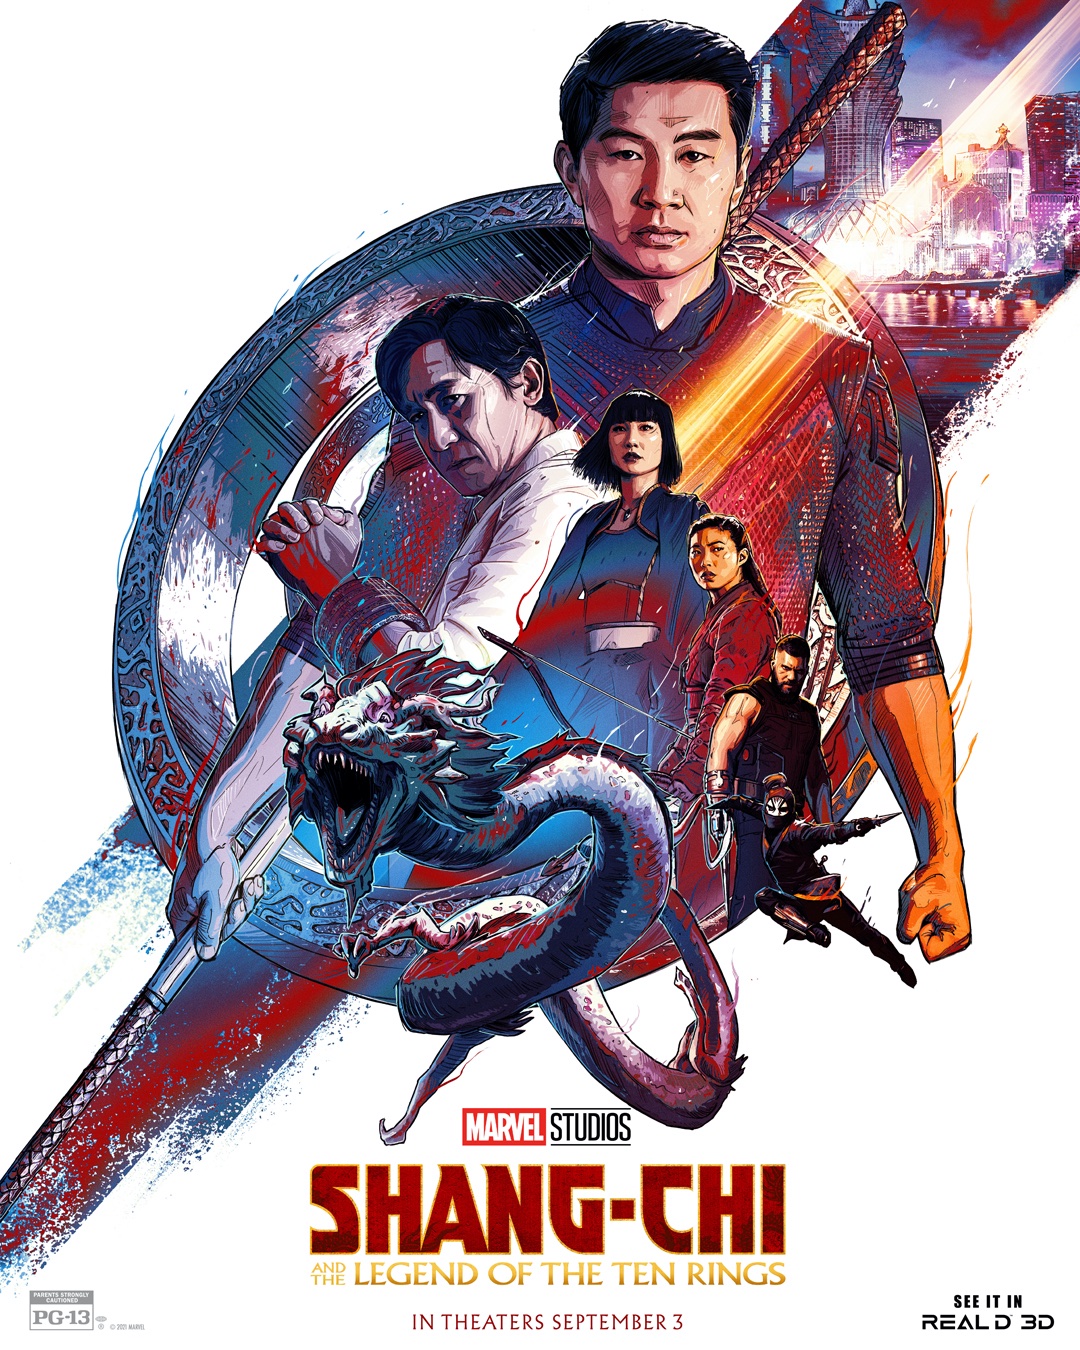 Shang-chi and the legend of the ten rings